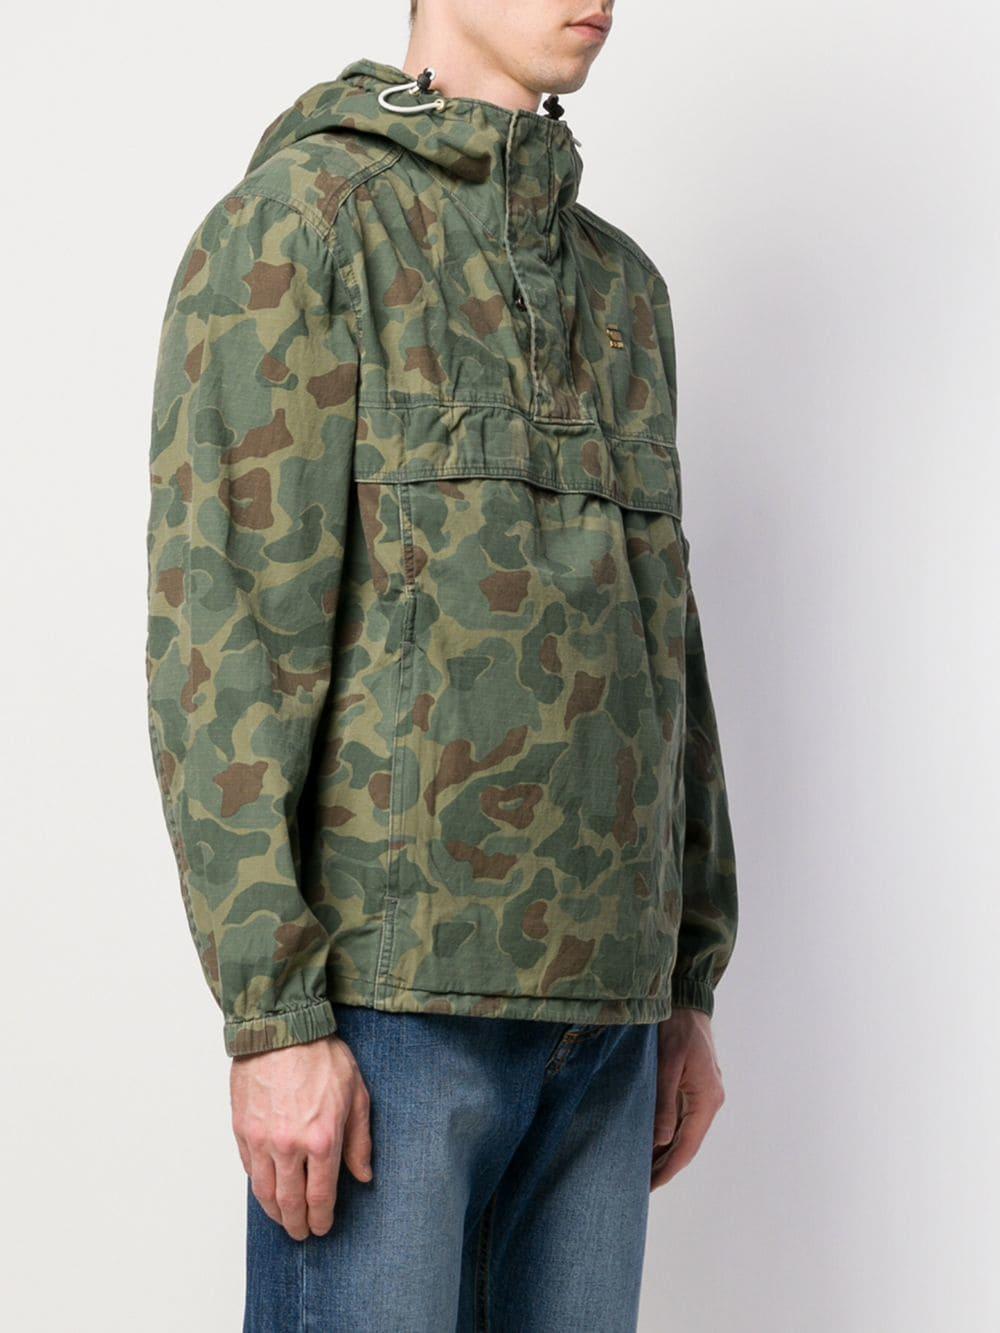 G-Star RAW Denim Xpo Over Head Camo Jacket in Green for Men - Lyst